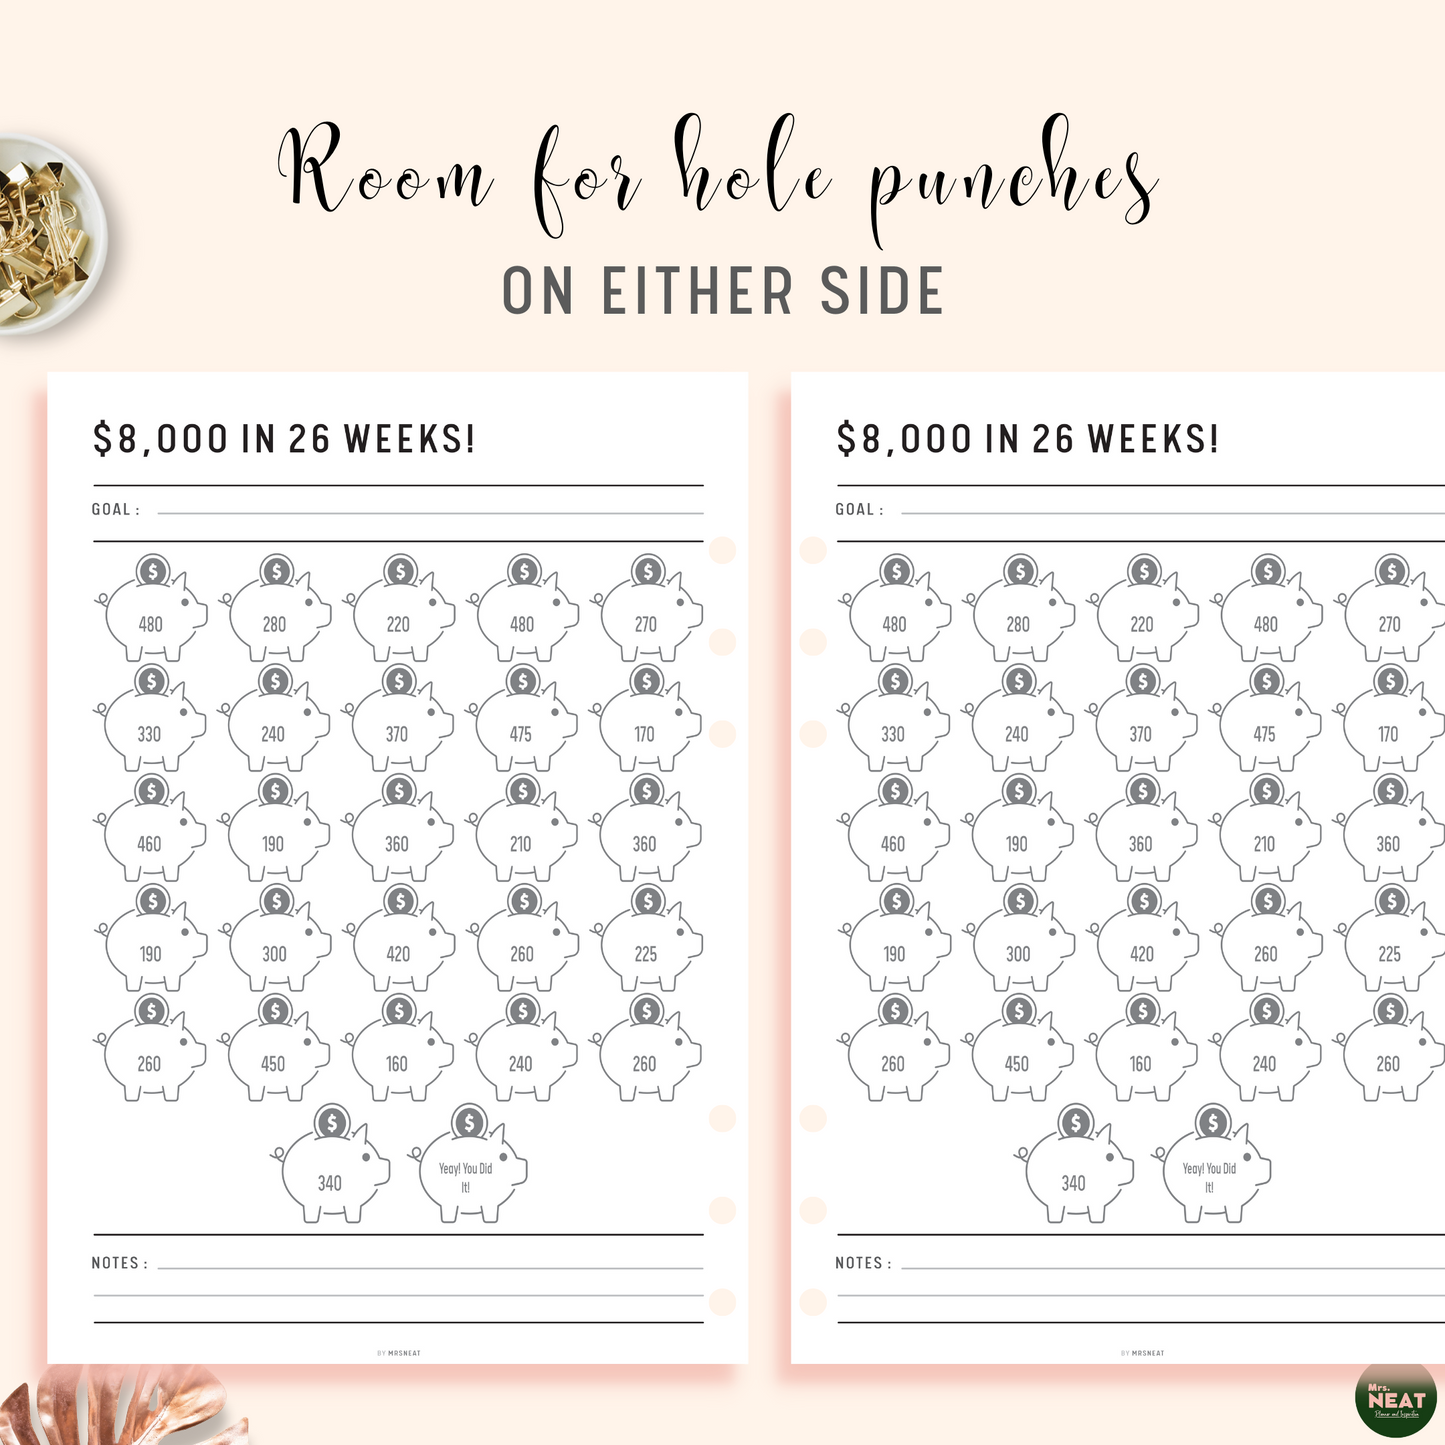 $8000 Money Saving Challenge Planner in 26 Weeks with room for hole punches on either side